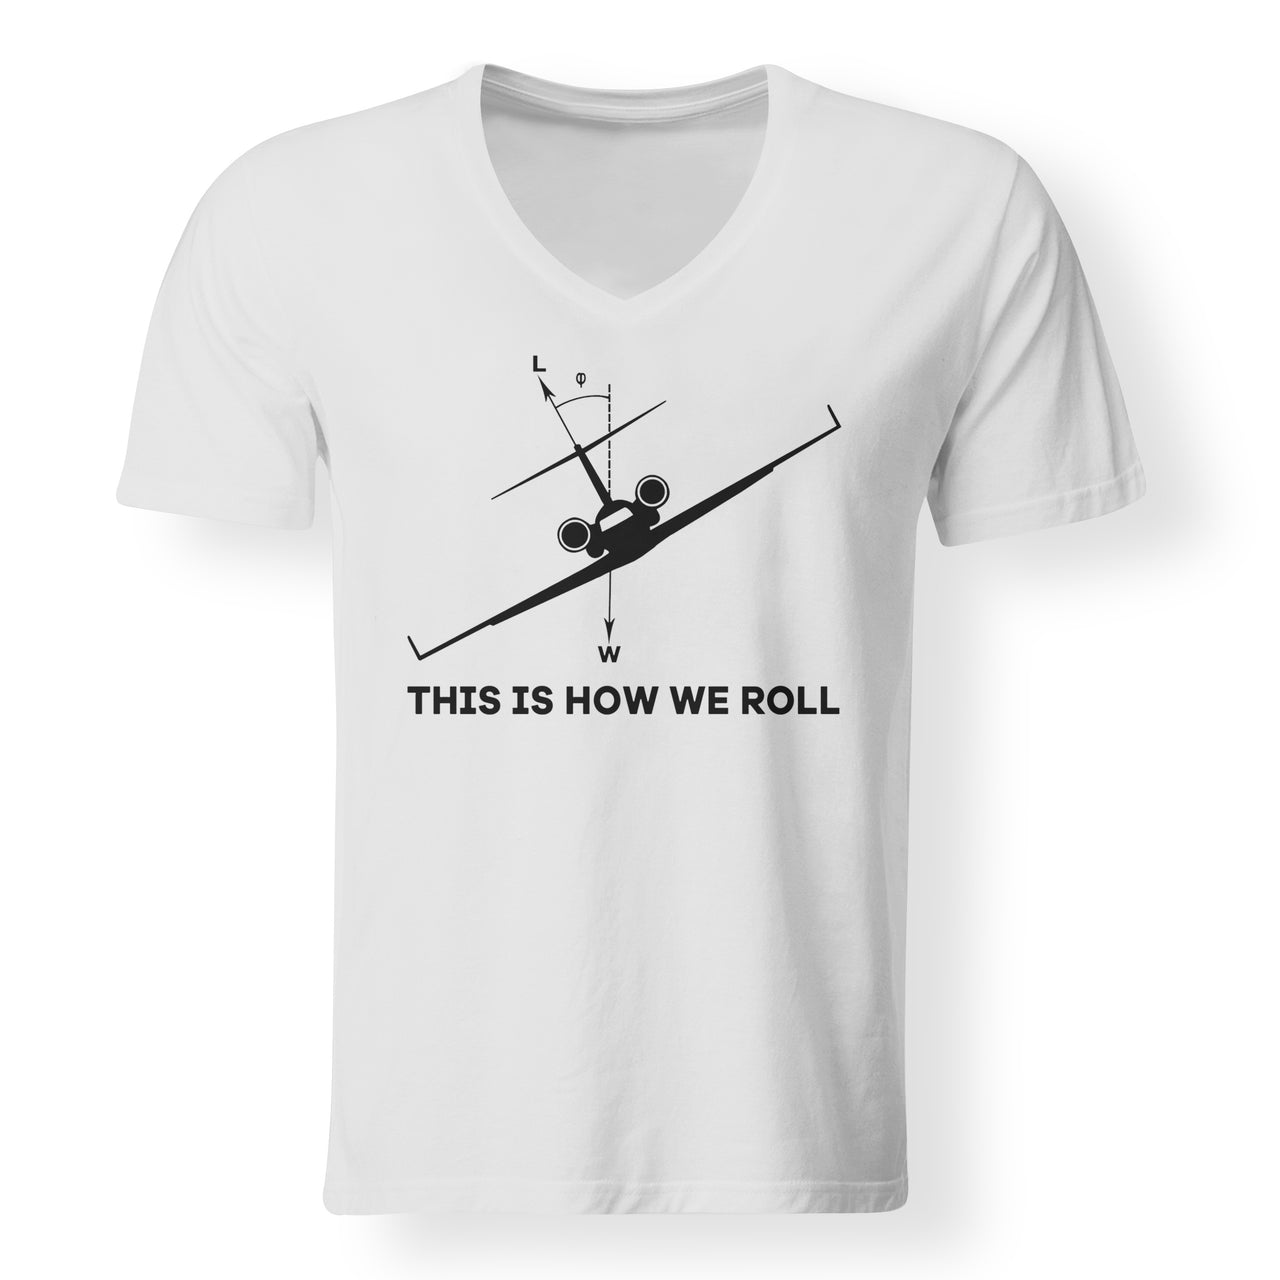 This is How We Roll Designed V-Neck T-Shirts